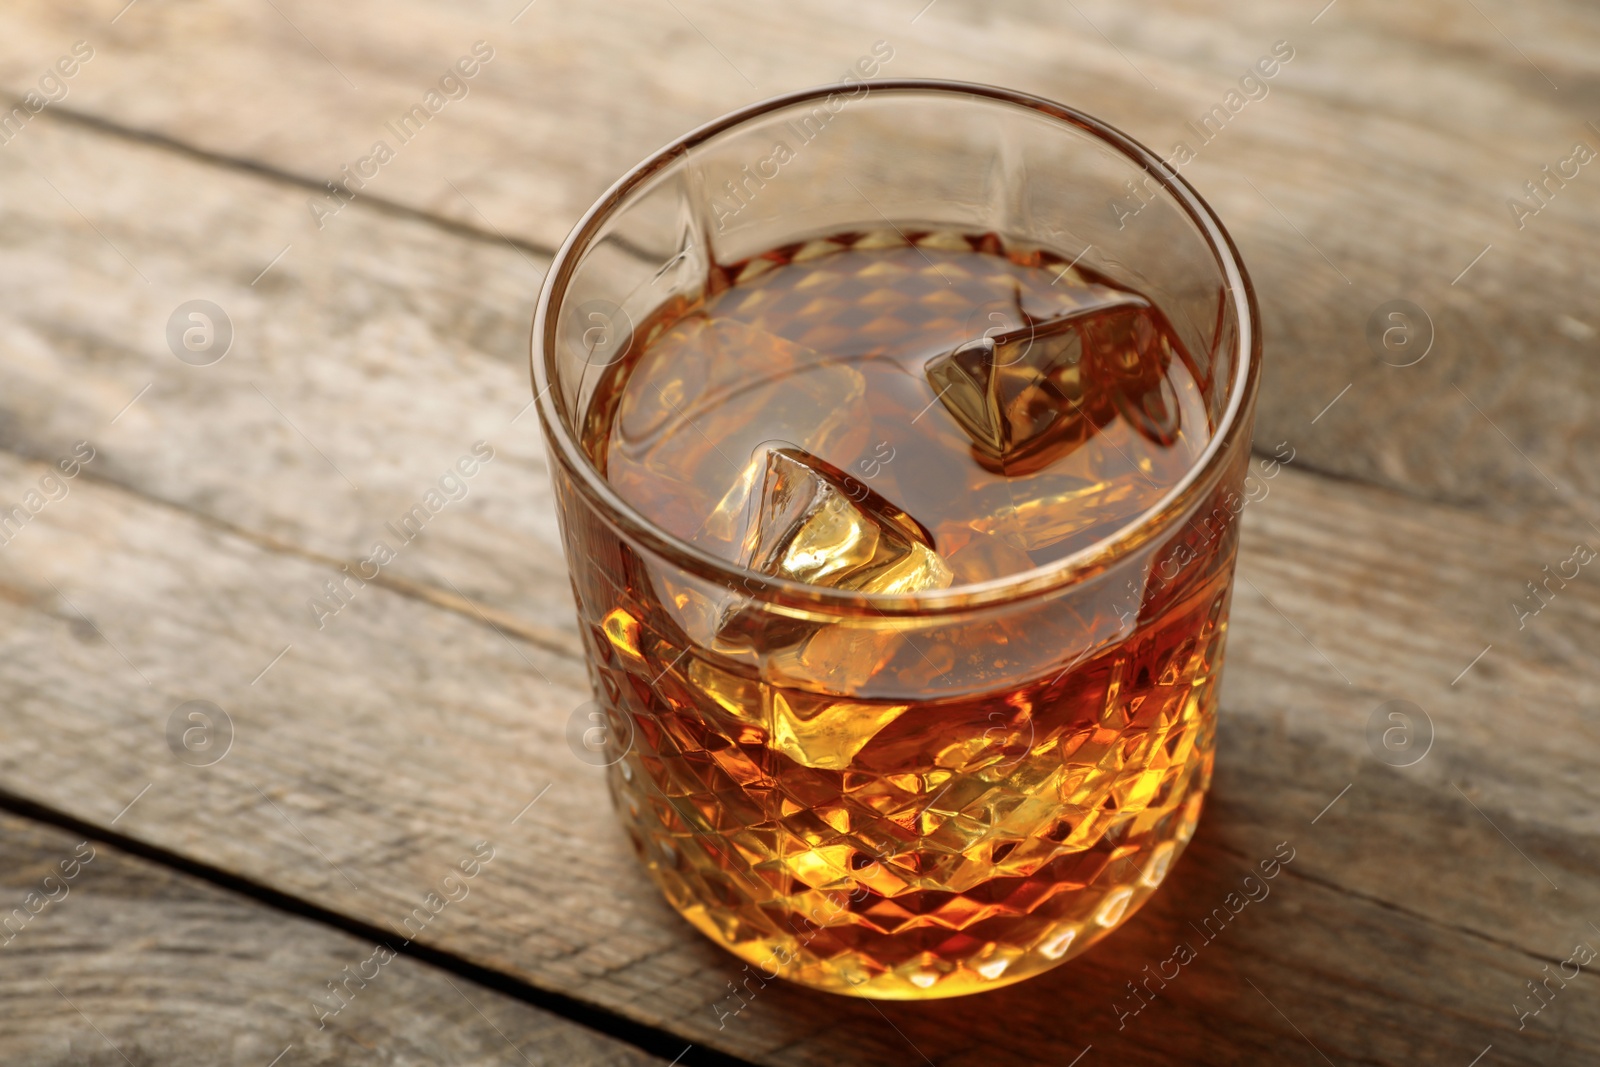 Photo of Golden whiskey in glass with ice cubes on wooden table